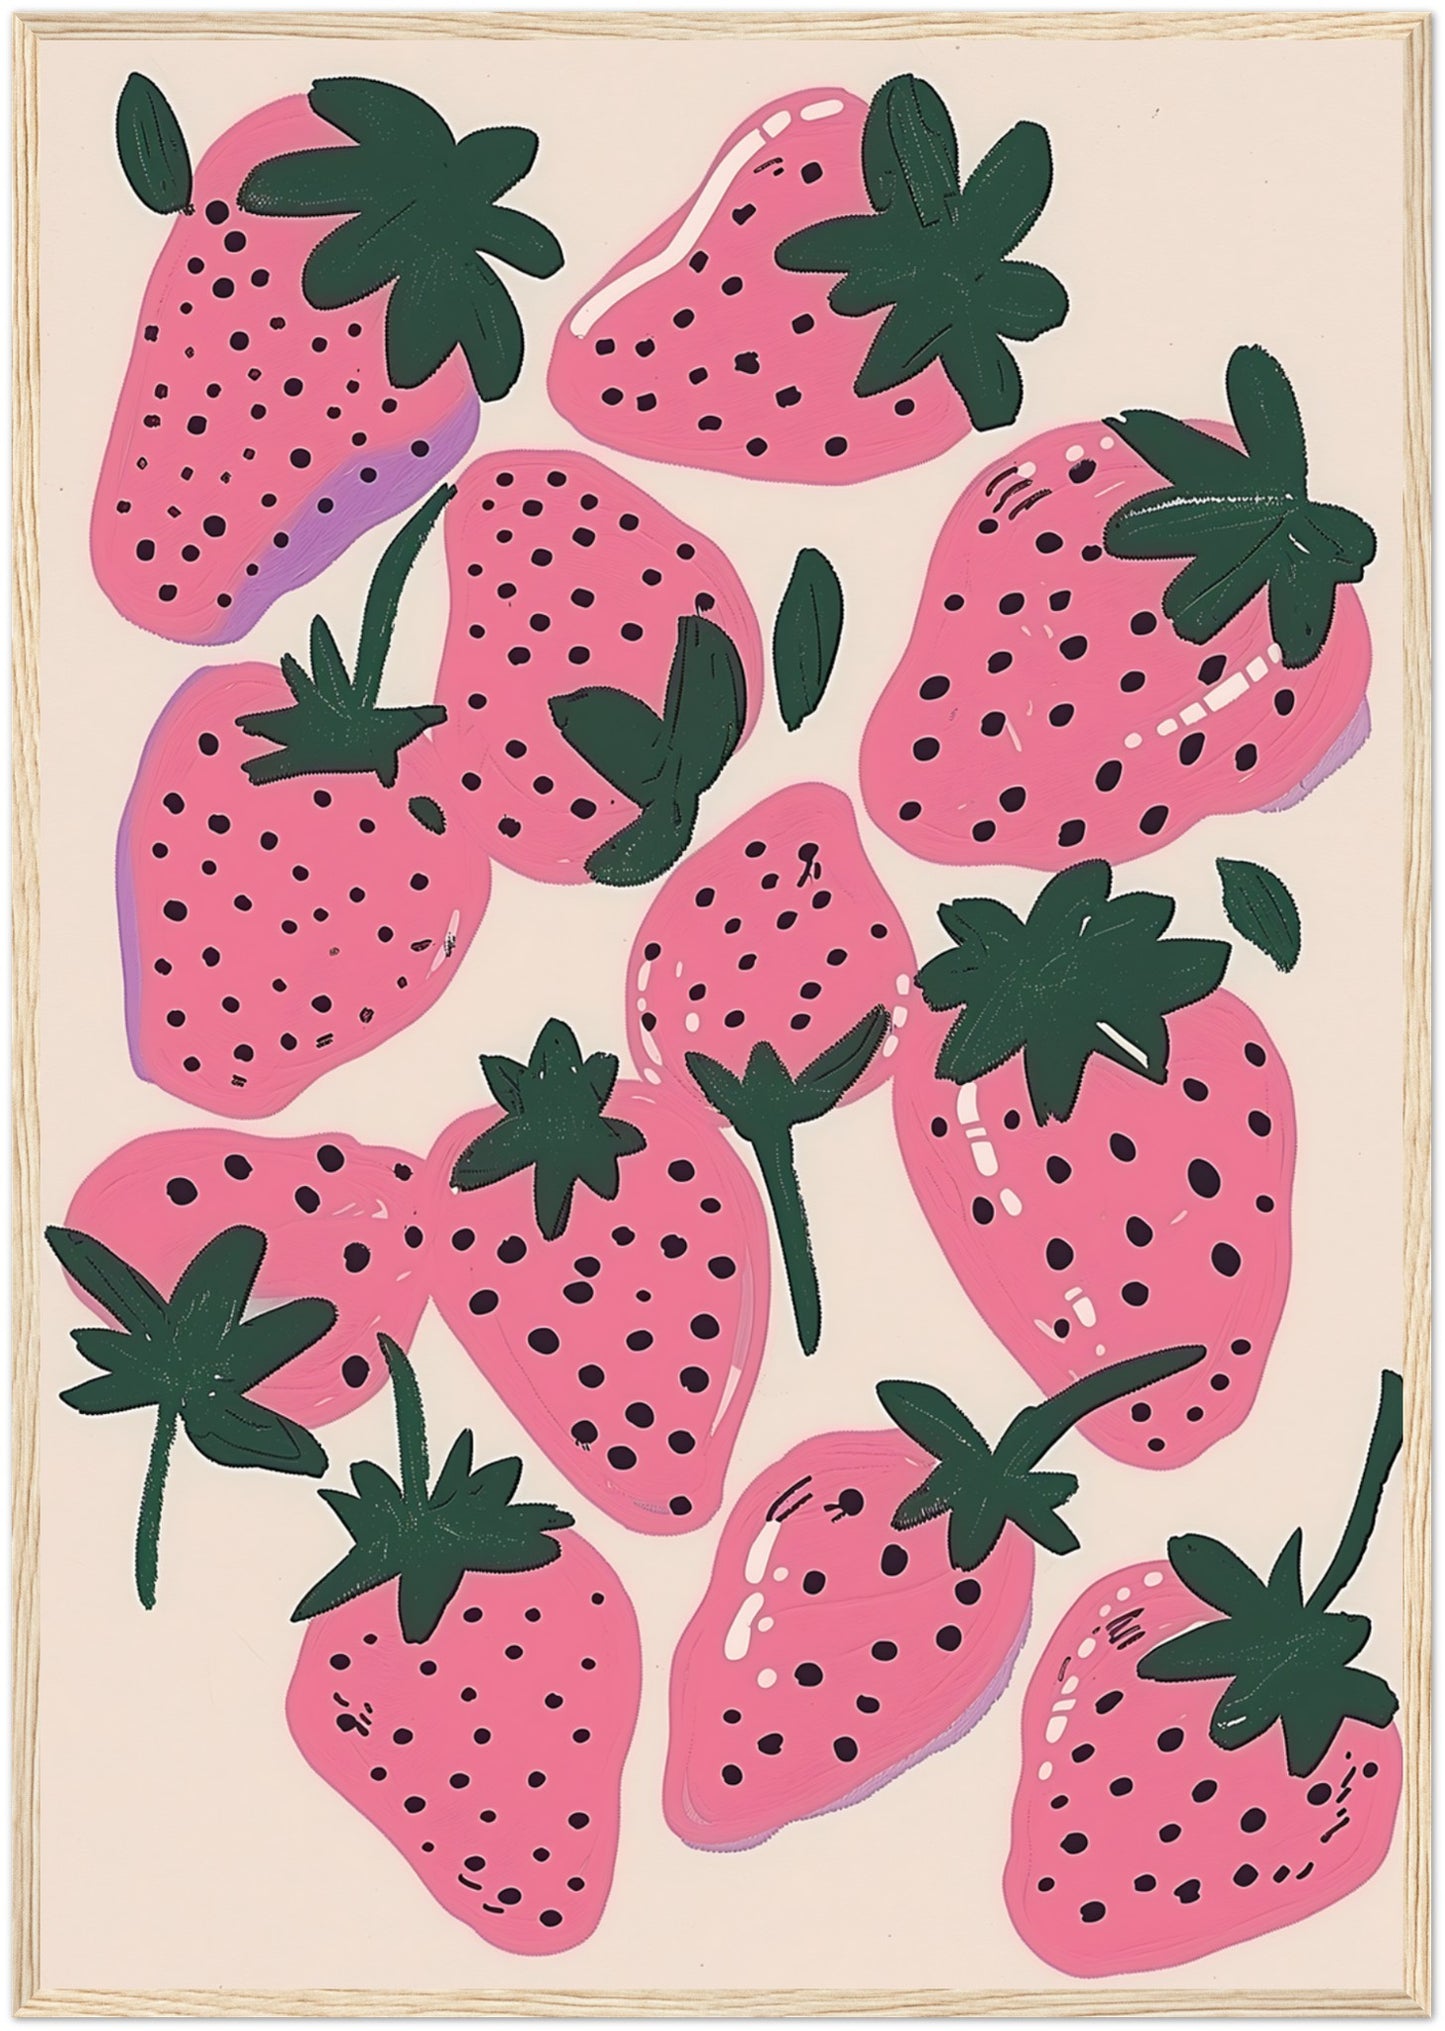 Illustration of stylized pink strawberries with black seeds and green leaves on a light background.